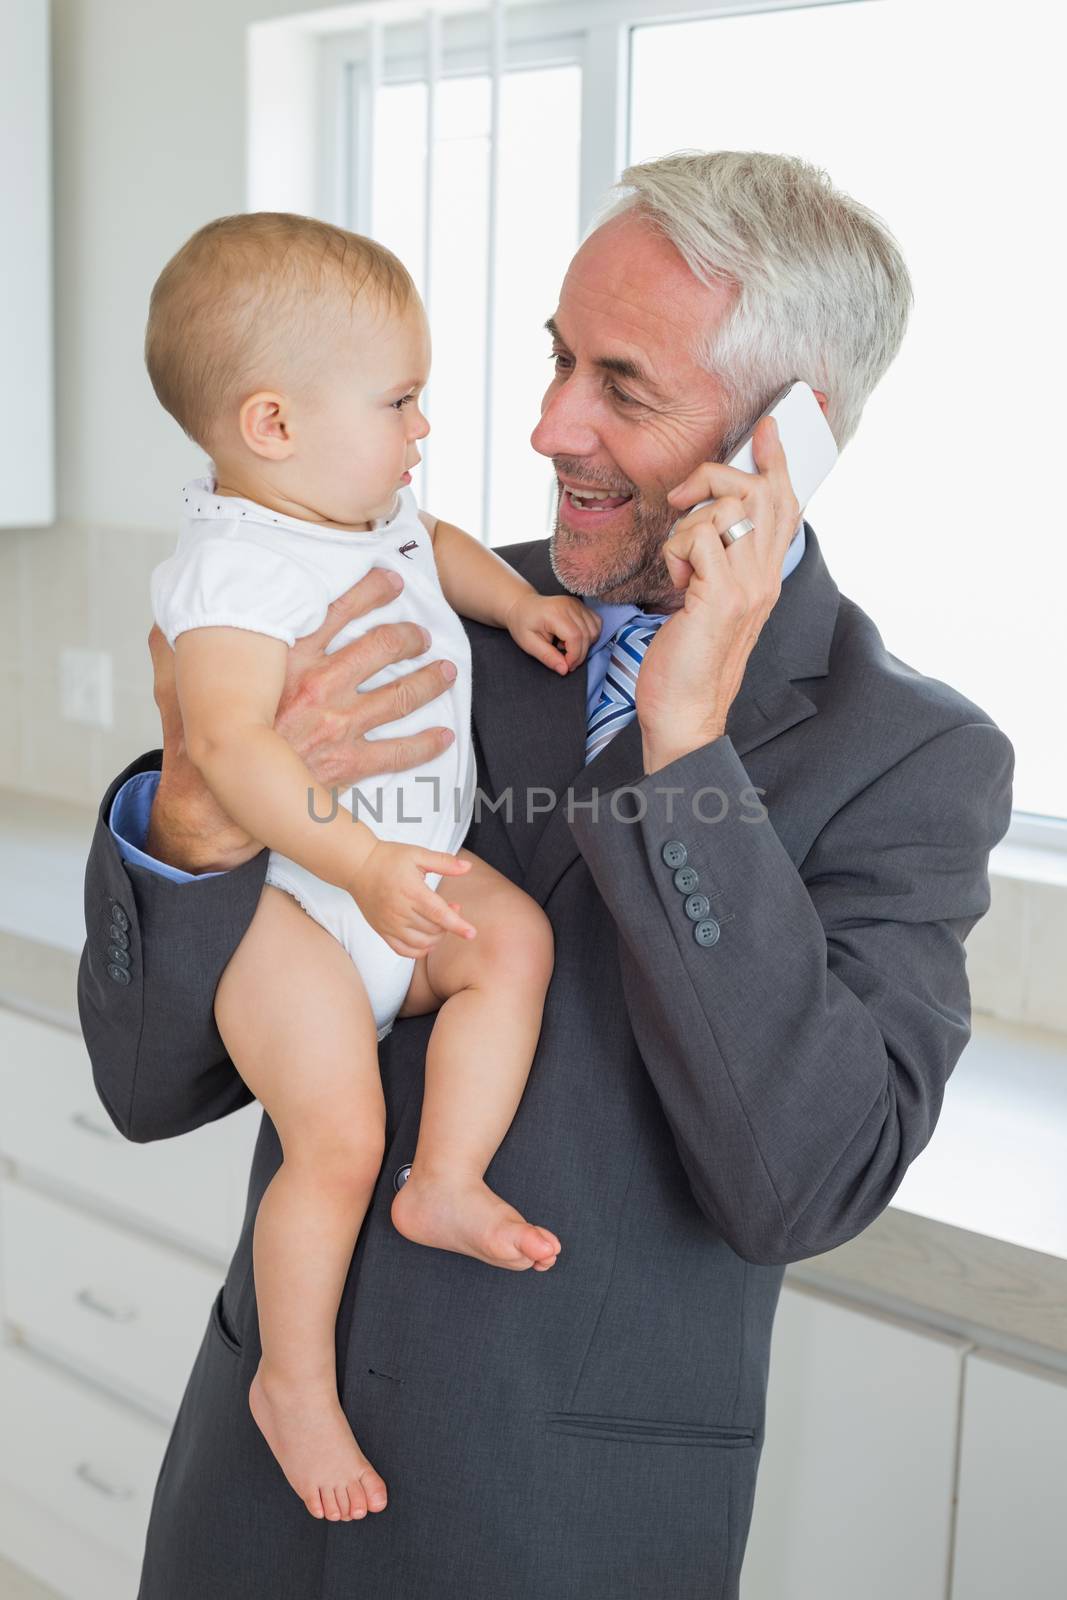 Smiling businessman holding his baby in the morning before work at home in the kitchen